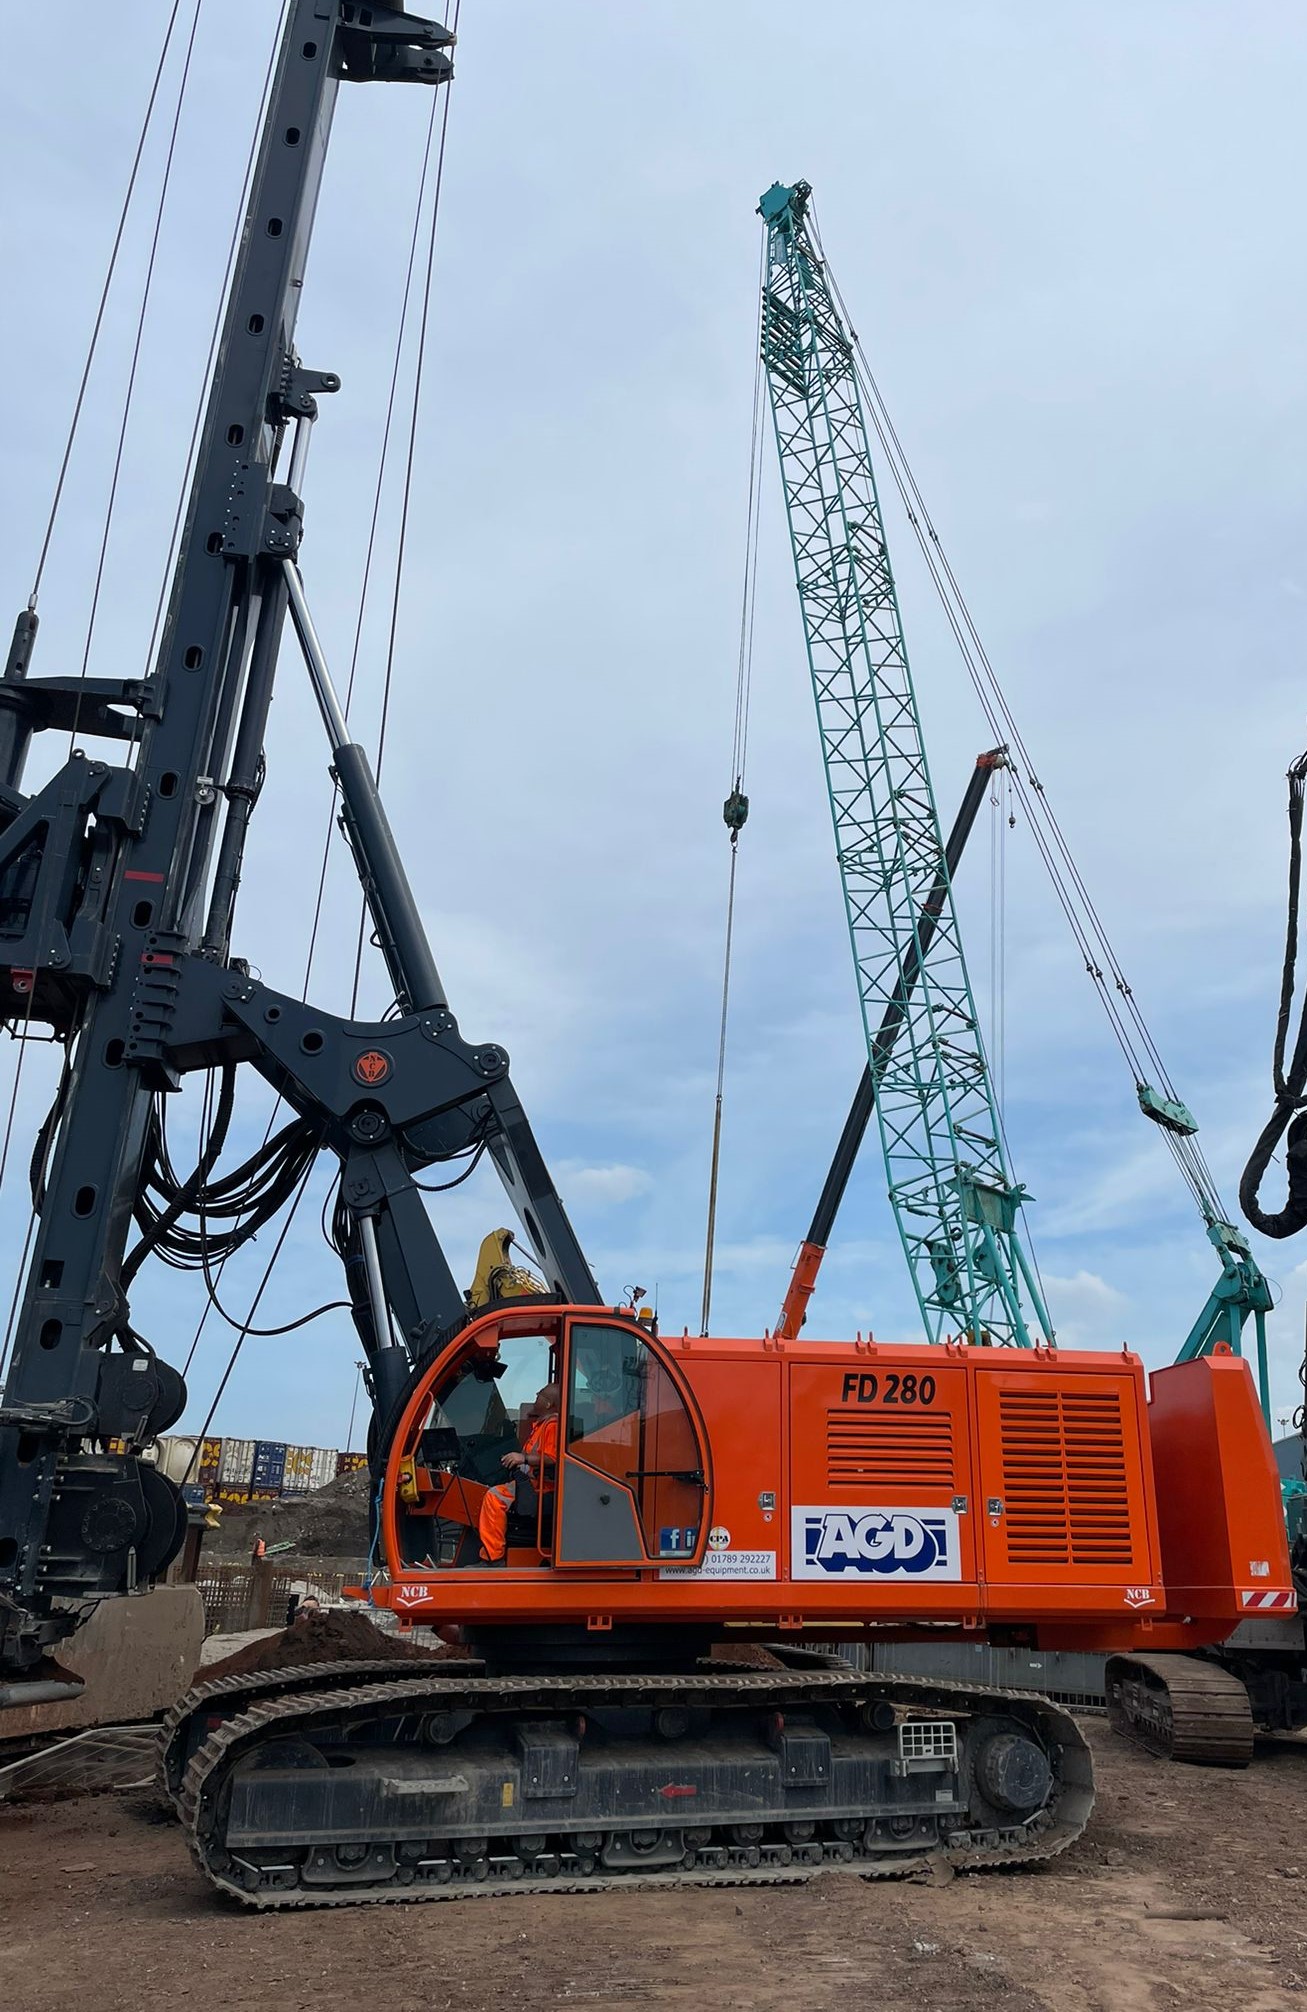 Suppliers of High-Capacity Rotary Piling Rig Hire UK